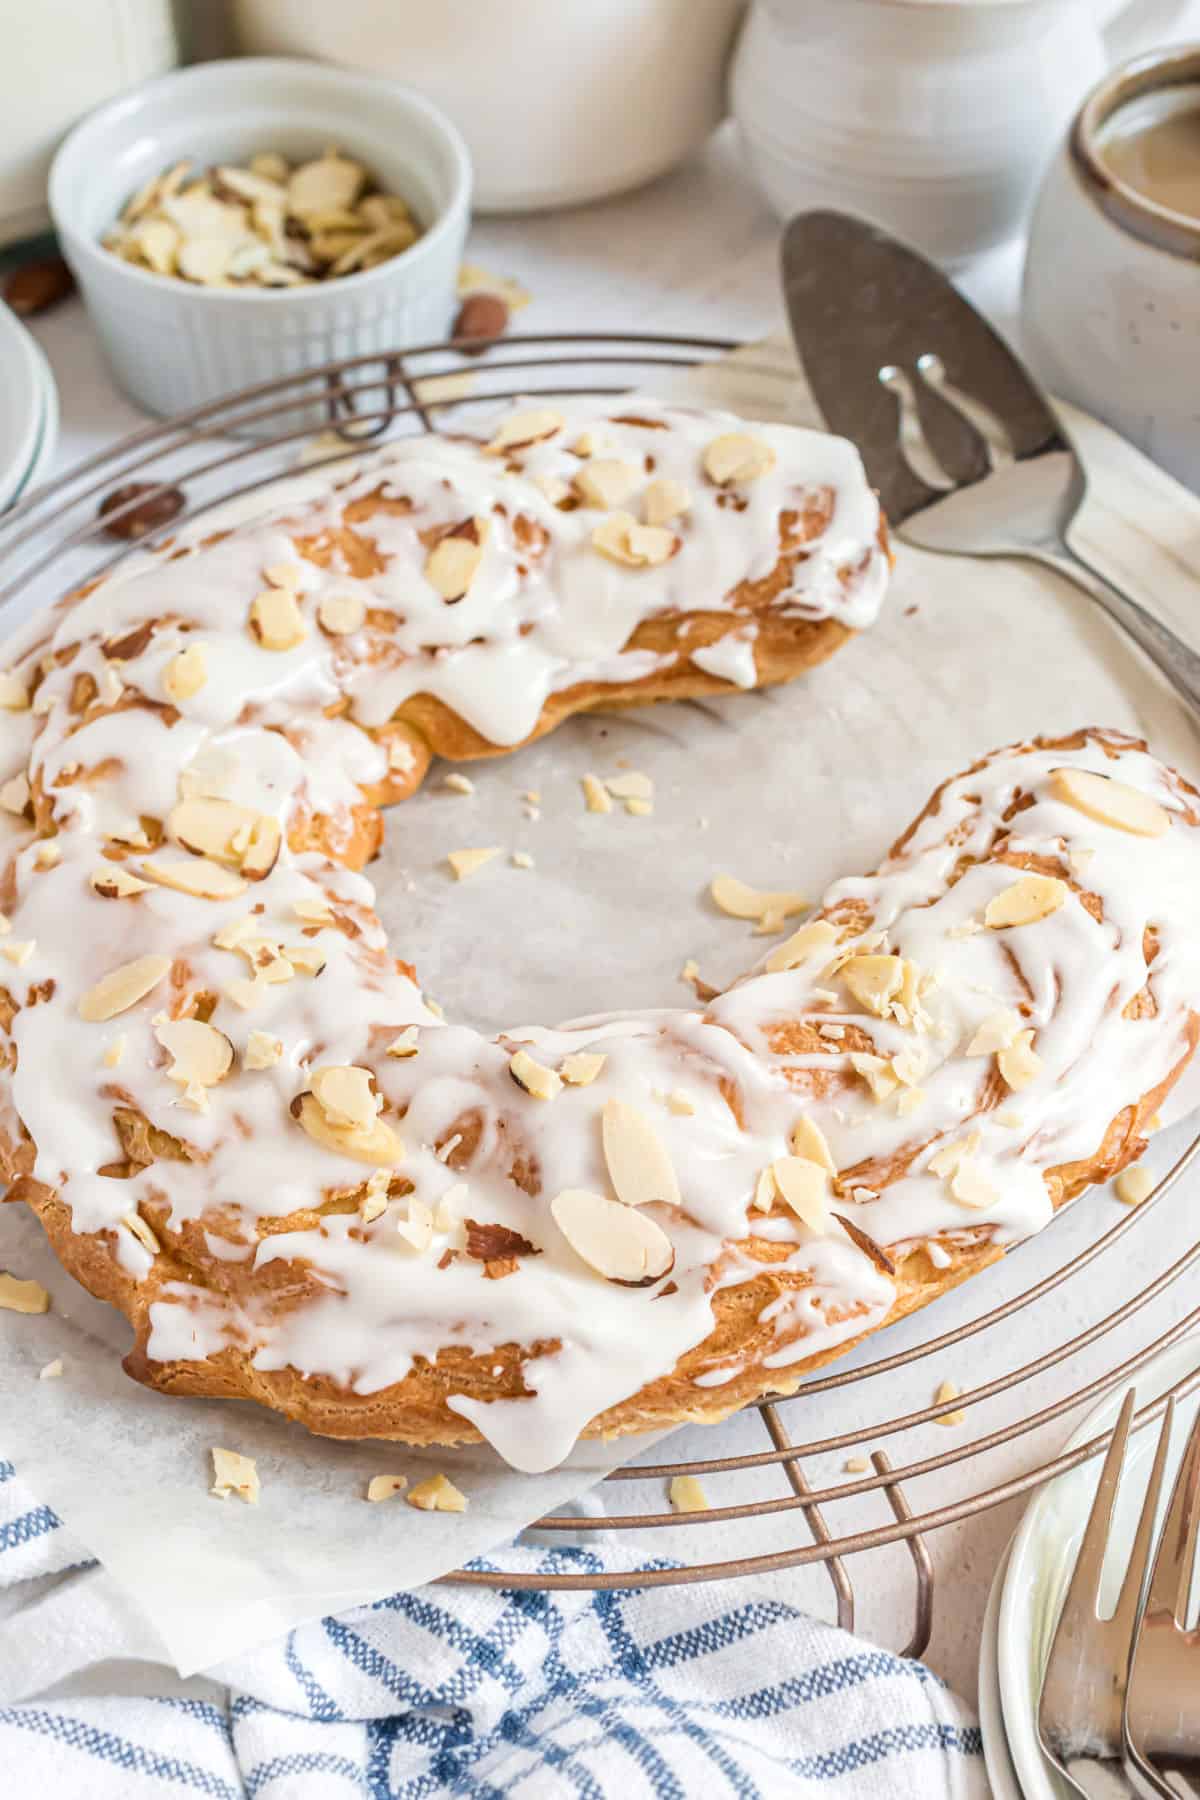 Almond kringle with icing on a wire rack to serve.